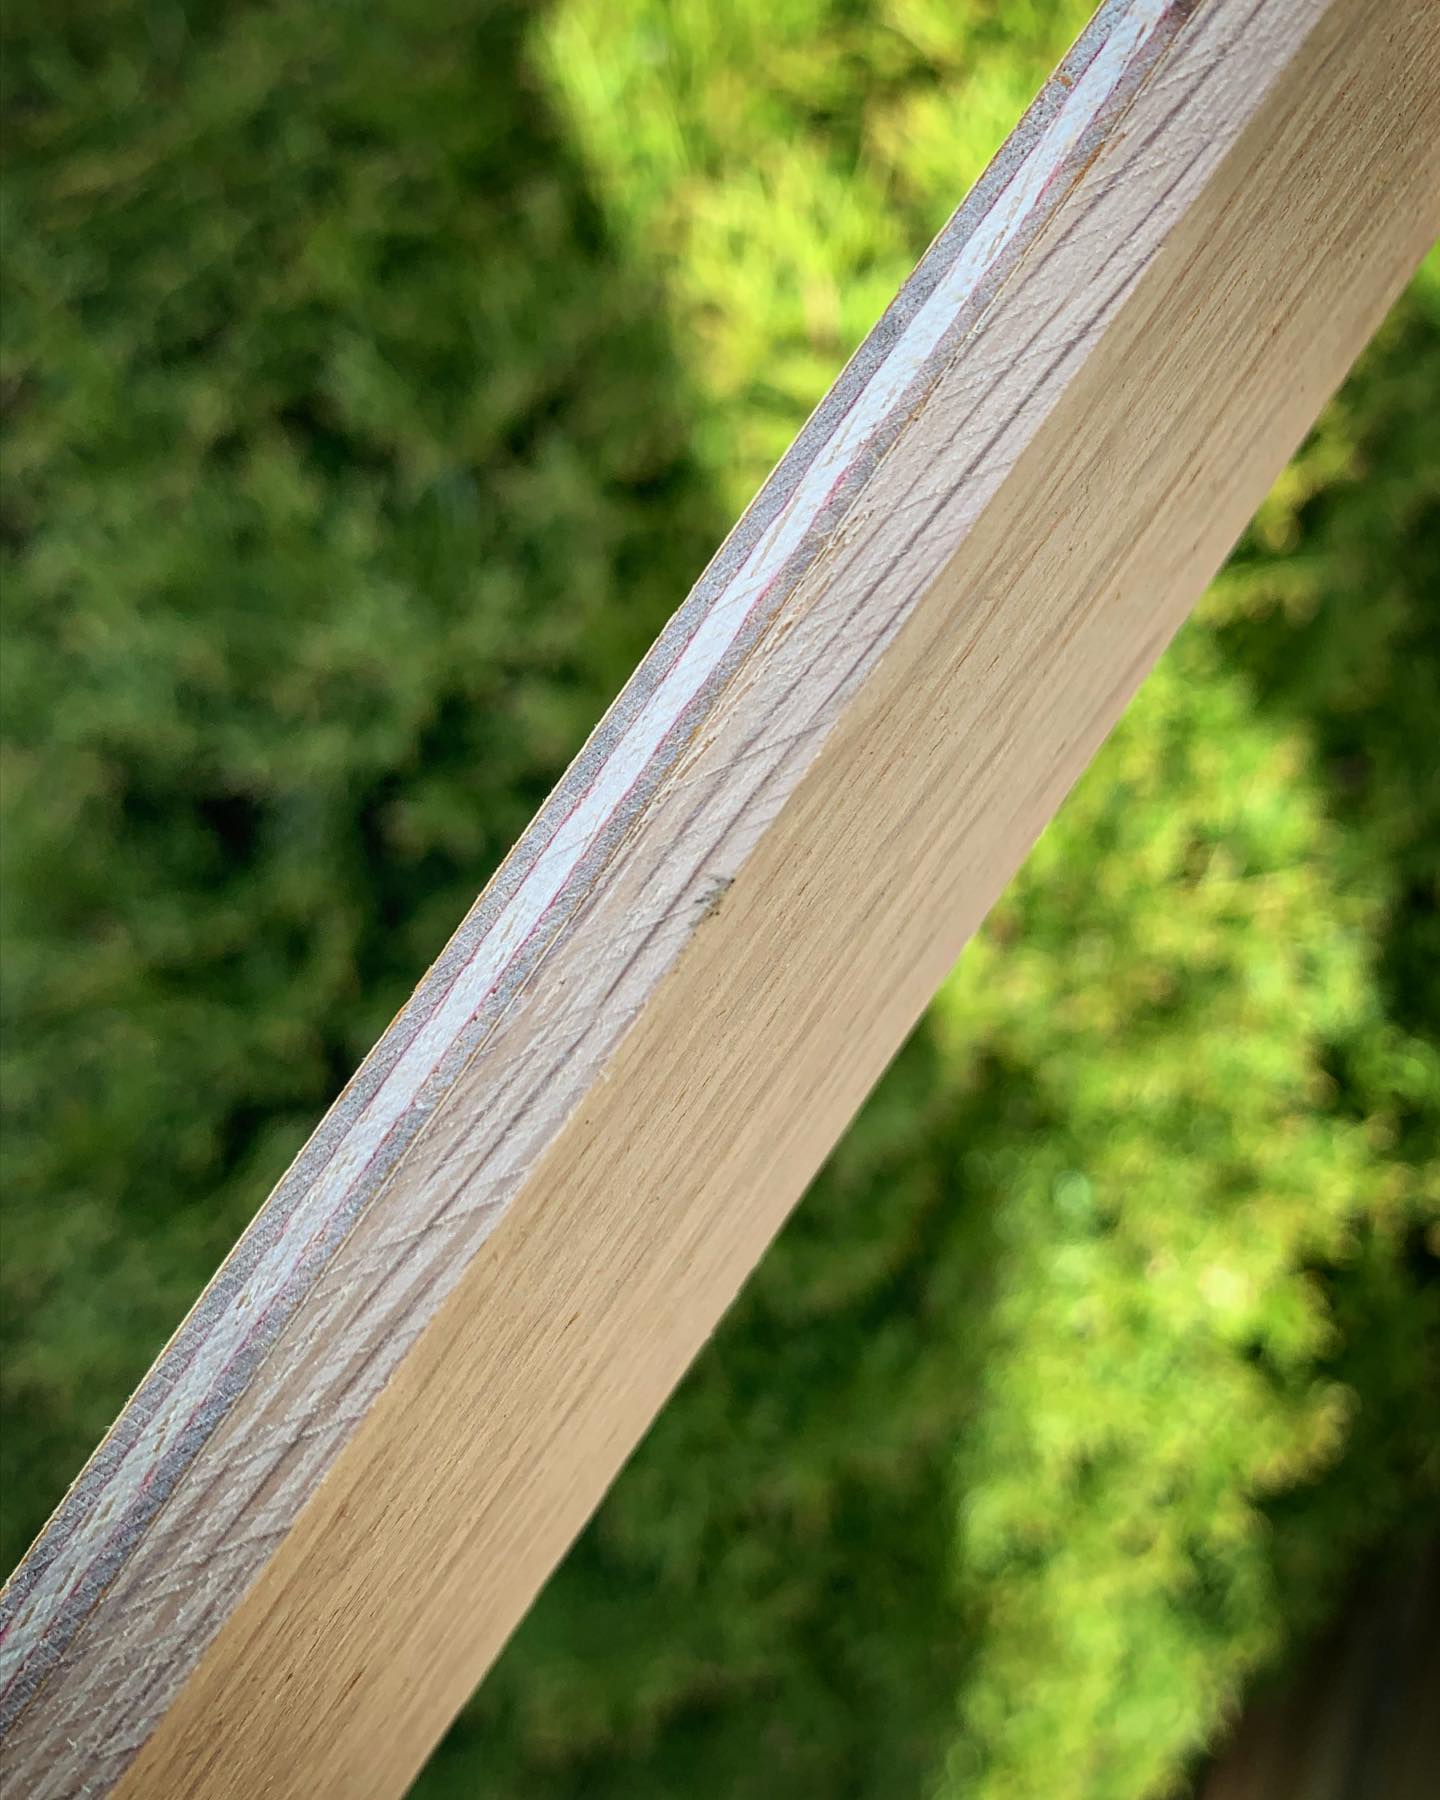 A nice close up of some plywood we’ve veneered with oak for a bespoke project we’re working on. 🧡